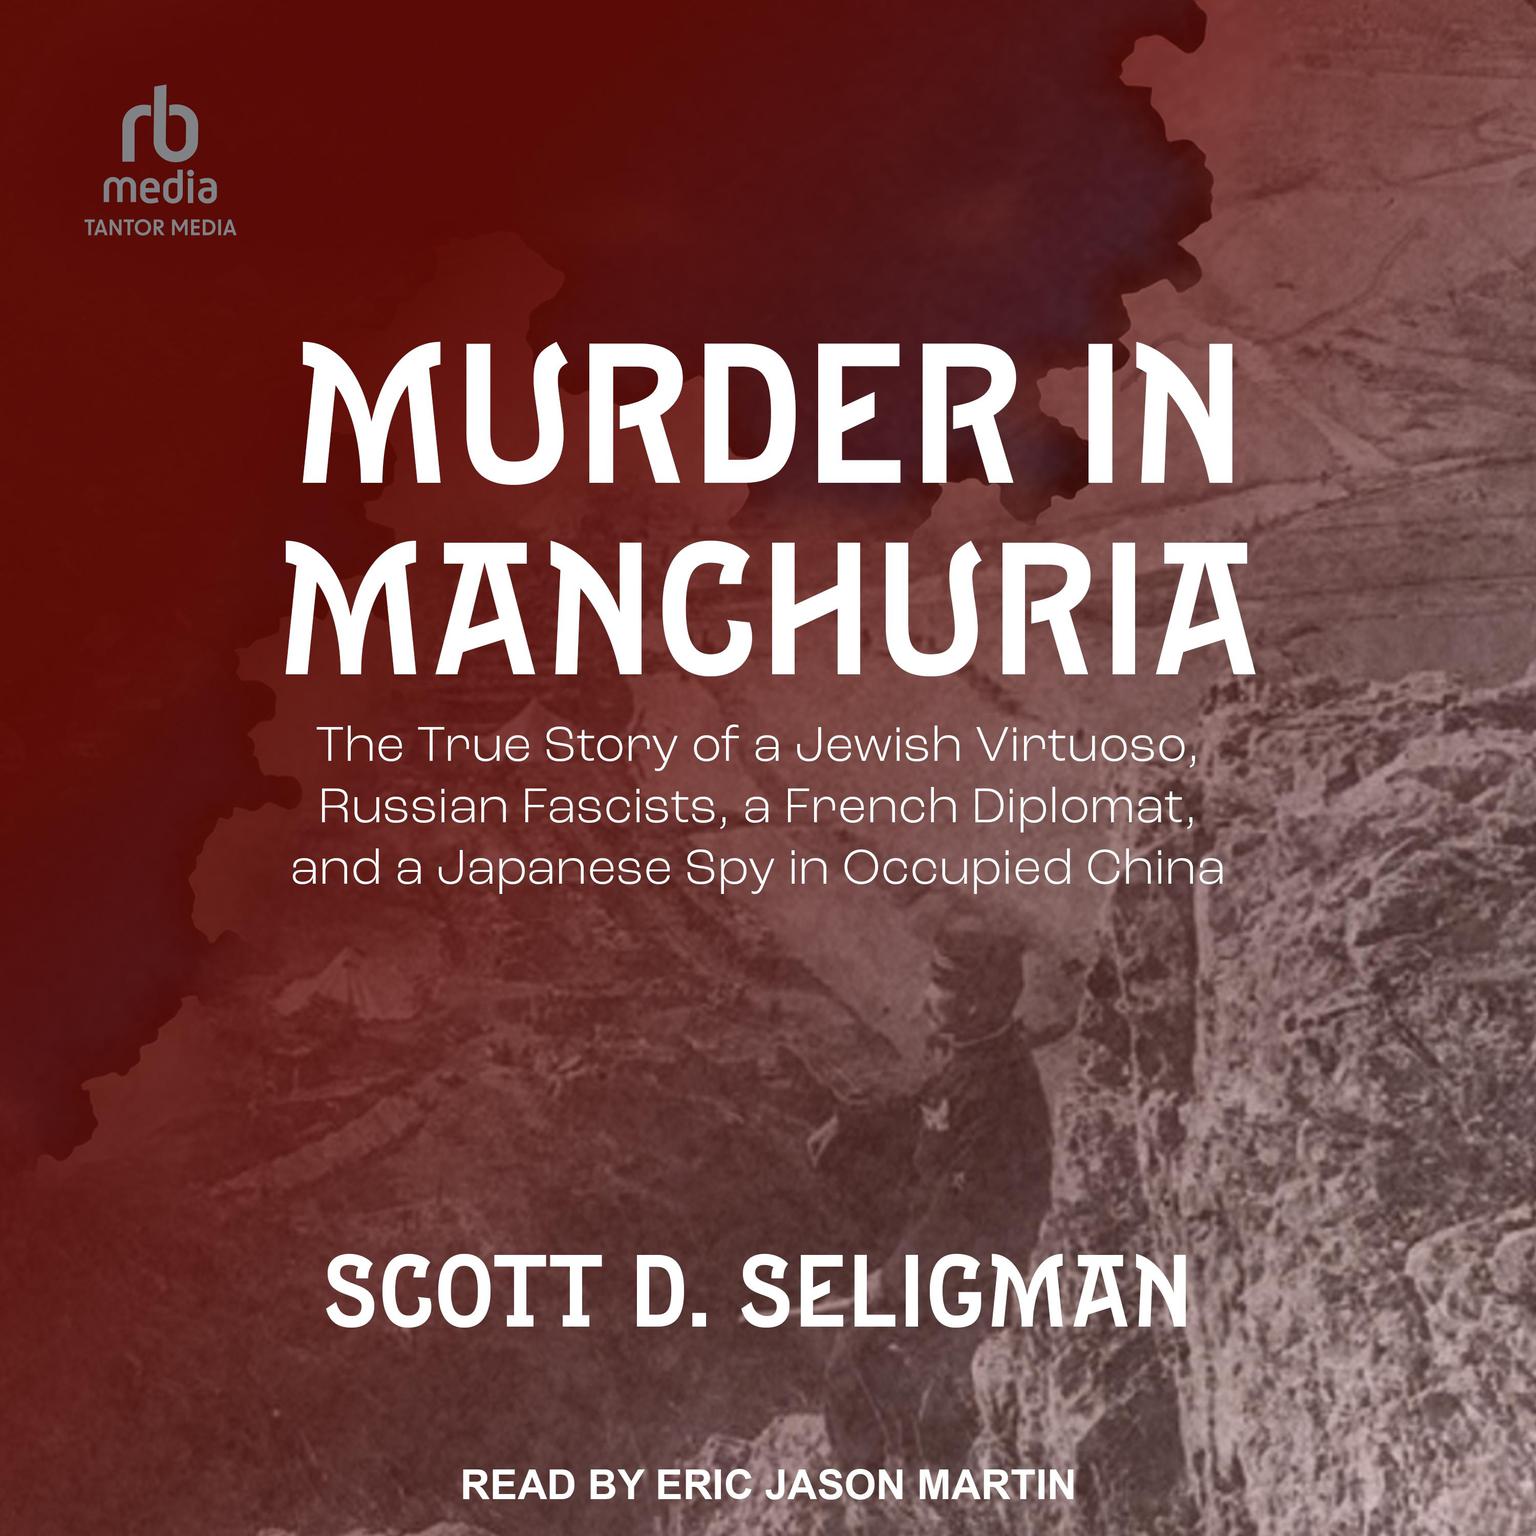 Murder in Manchuria: The True Story of a Jewish Virtuoso, Russian Fascists, a French Diplomat, and a Japanese Spy in Occupied China Audiobook, by Scott D. Seligman